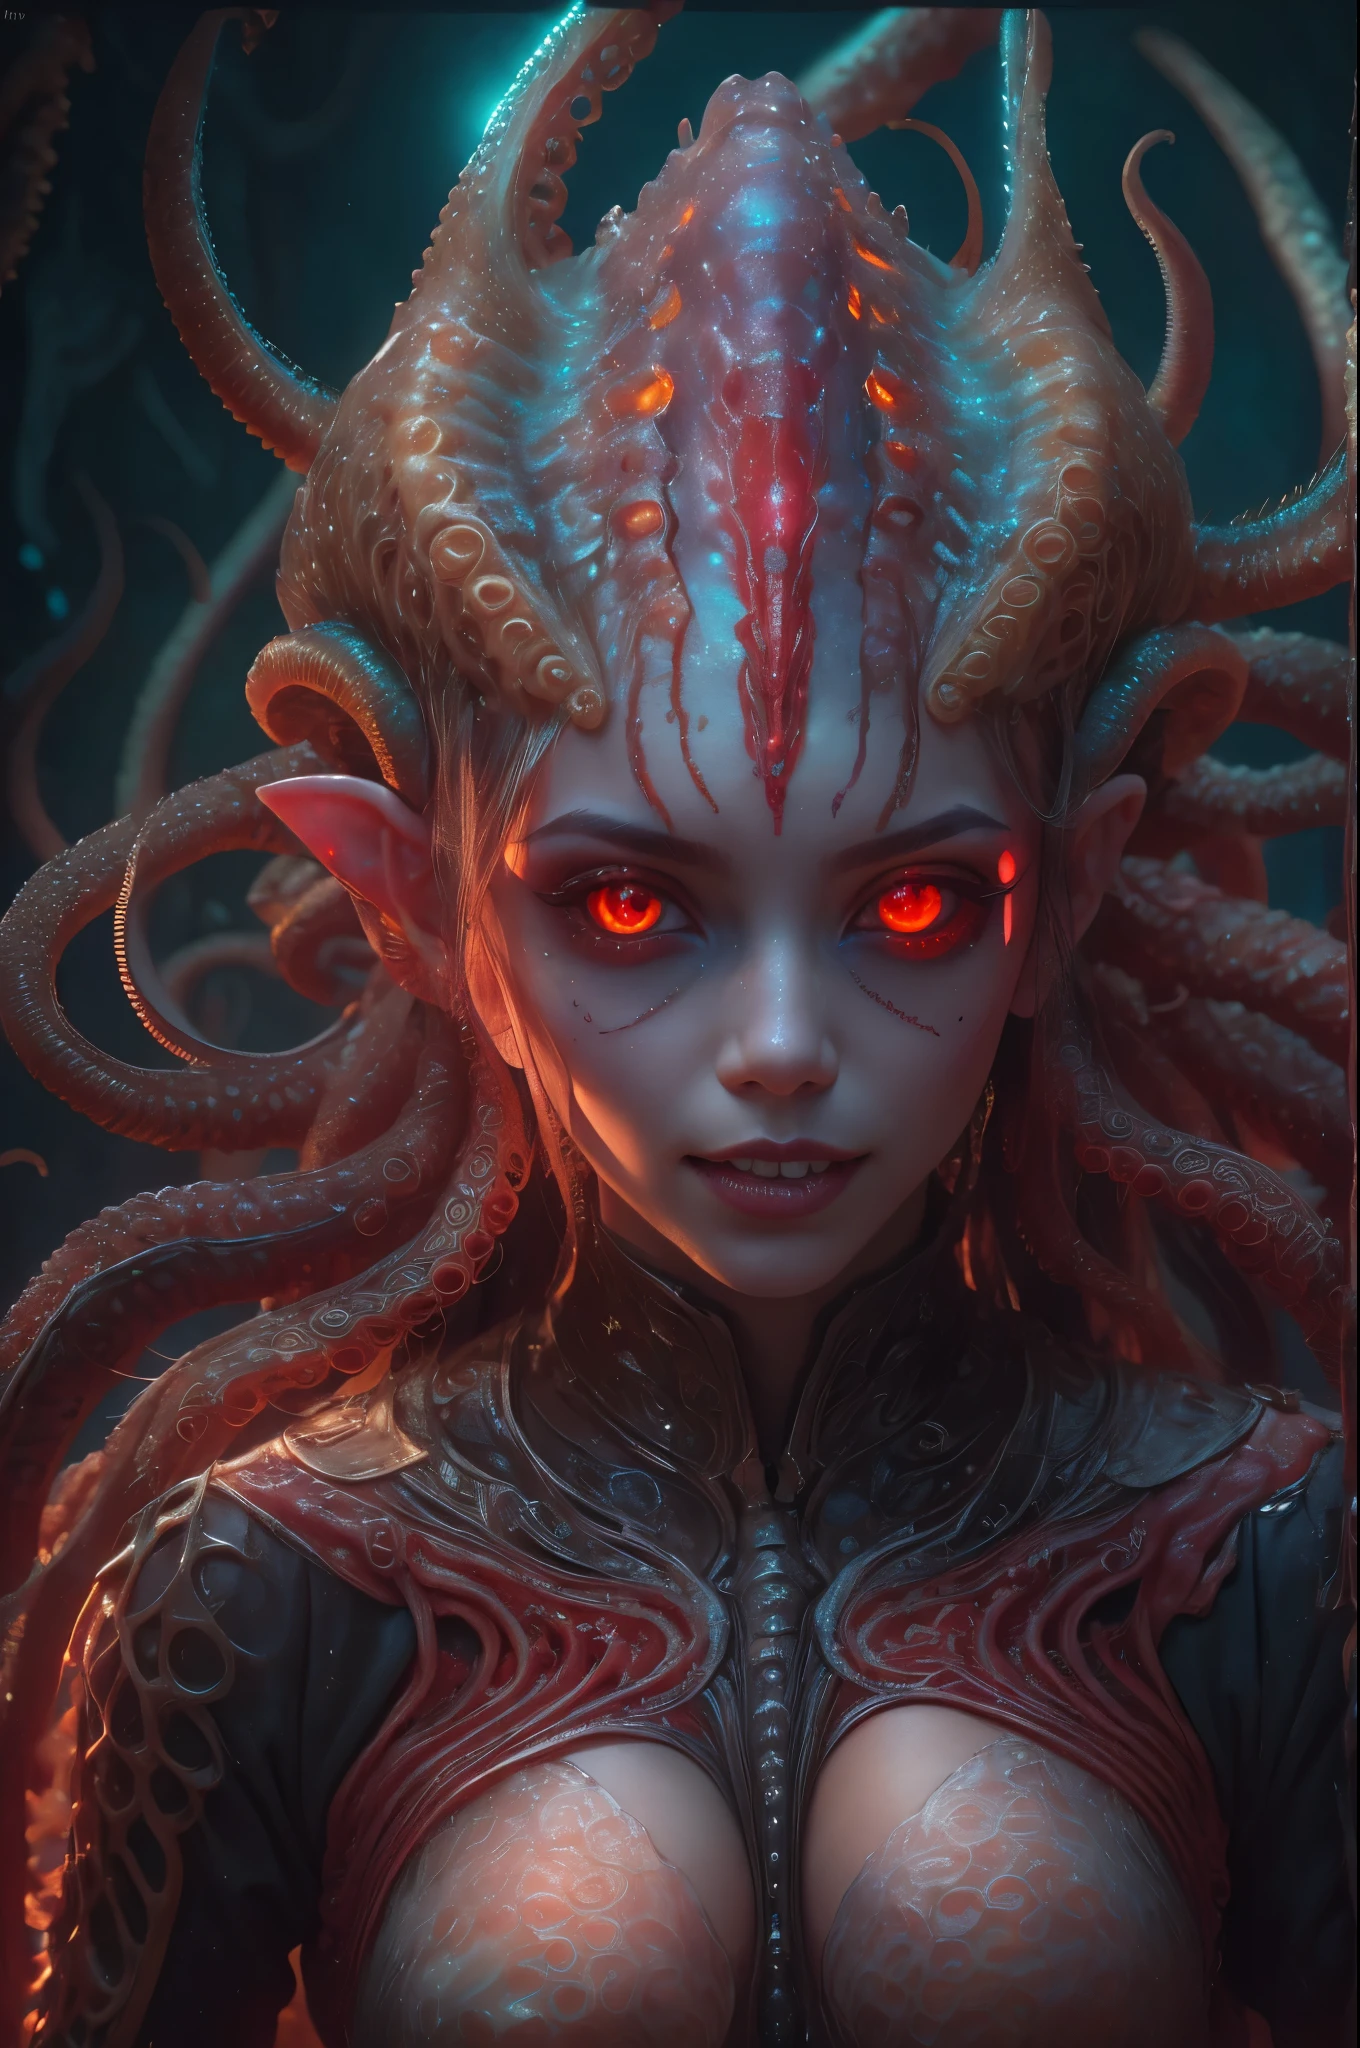 scary and sexy detailed art in color, Portrait, (beautiful and obscene female alien:1.4), (vulgarity1.5), (she has glowing red eyes with no pupils:1.8), (Translucent skin:1.7),  ((There is a female genital-like organ in the middle of the forehead:1.9)), (The most beautiful face in the history of the universe:1.2),an evil gaze that seduces, (large mouth:1.1), (sharp teeth like a vampire:1.2), Full body portrait, (bio luminescent:1.5), (Smile wickedly:1.3),  (sexypose:1.5), incredibly beautiful matured alien, (she has unparalleled beauty:1.5),  No humans, cells are fused, (Lots of translucent tentacles:1.6) extraterrestrial, cell, bio image, best quality, 8K,In 4K_quality, High freshness, Dramatic Lighting, masterpiece:1.5, cinematic quality, detail up, (exquisite details:1.2), high resolution, High freshness, drawing faithfully, (Thick eyebrows:1.2), Beautiful eyes with fine symmetry, (Highly detailed face and eyes:1.2),  (Super detailed skin quality feeling:1.1), perfect anatomy,  (Beautiful toned body:1.5),  (Moist skin:1.2), not wearing makeup, (dark circles:1.1), long canines, cinematic drawing of characters, ultra high quality model, cinematic quality, detail up, (exquisite details:1.2), high resolution, High freshness, drawing faithfully, official art, Unity 8K Wall  , 8K Portrait, best quality, Very high resolution, ultra detailed artistic photography, midnight aura,  unreal engine 5, Ultra Sharp Focus, art by Amano Yoshitaka, ArtGerm, Roisch, intricate artwork, best quality, masterpiece, ultra high resolution, (photos realistic:1.4), ultra realistic realism, dream-like, nautilus, Creation of fantasy, Snail, Dream Snail, (biopunk nautilus:1.3),Thrilling color schemes, ultra realistic realism, seductively smiling, (white tentacles with stripes:1.2), subtle emerald green accents, (expression of ecstasy:1.6) , in the dark, she has snake-like eyes